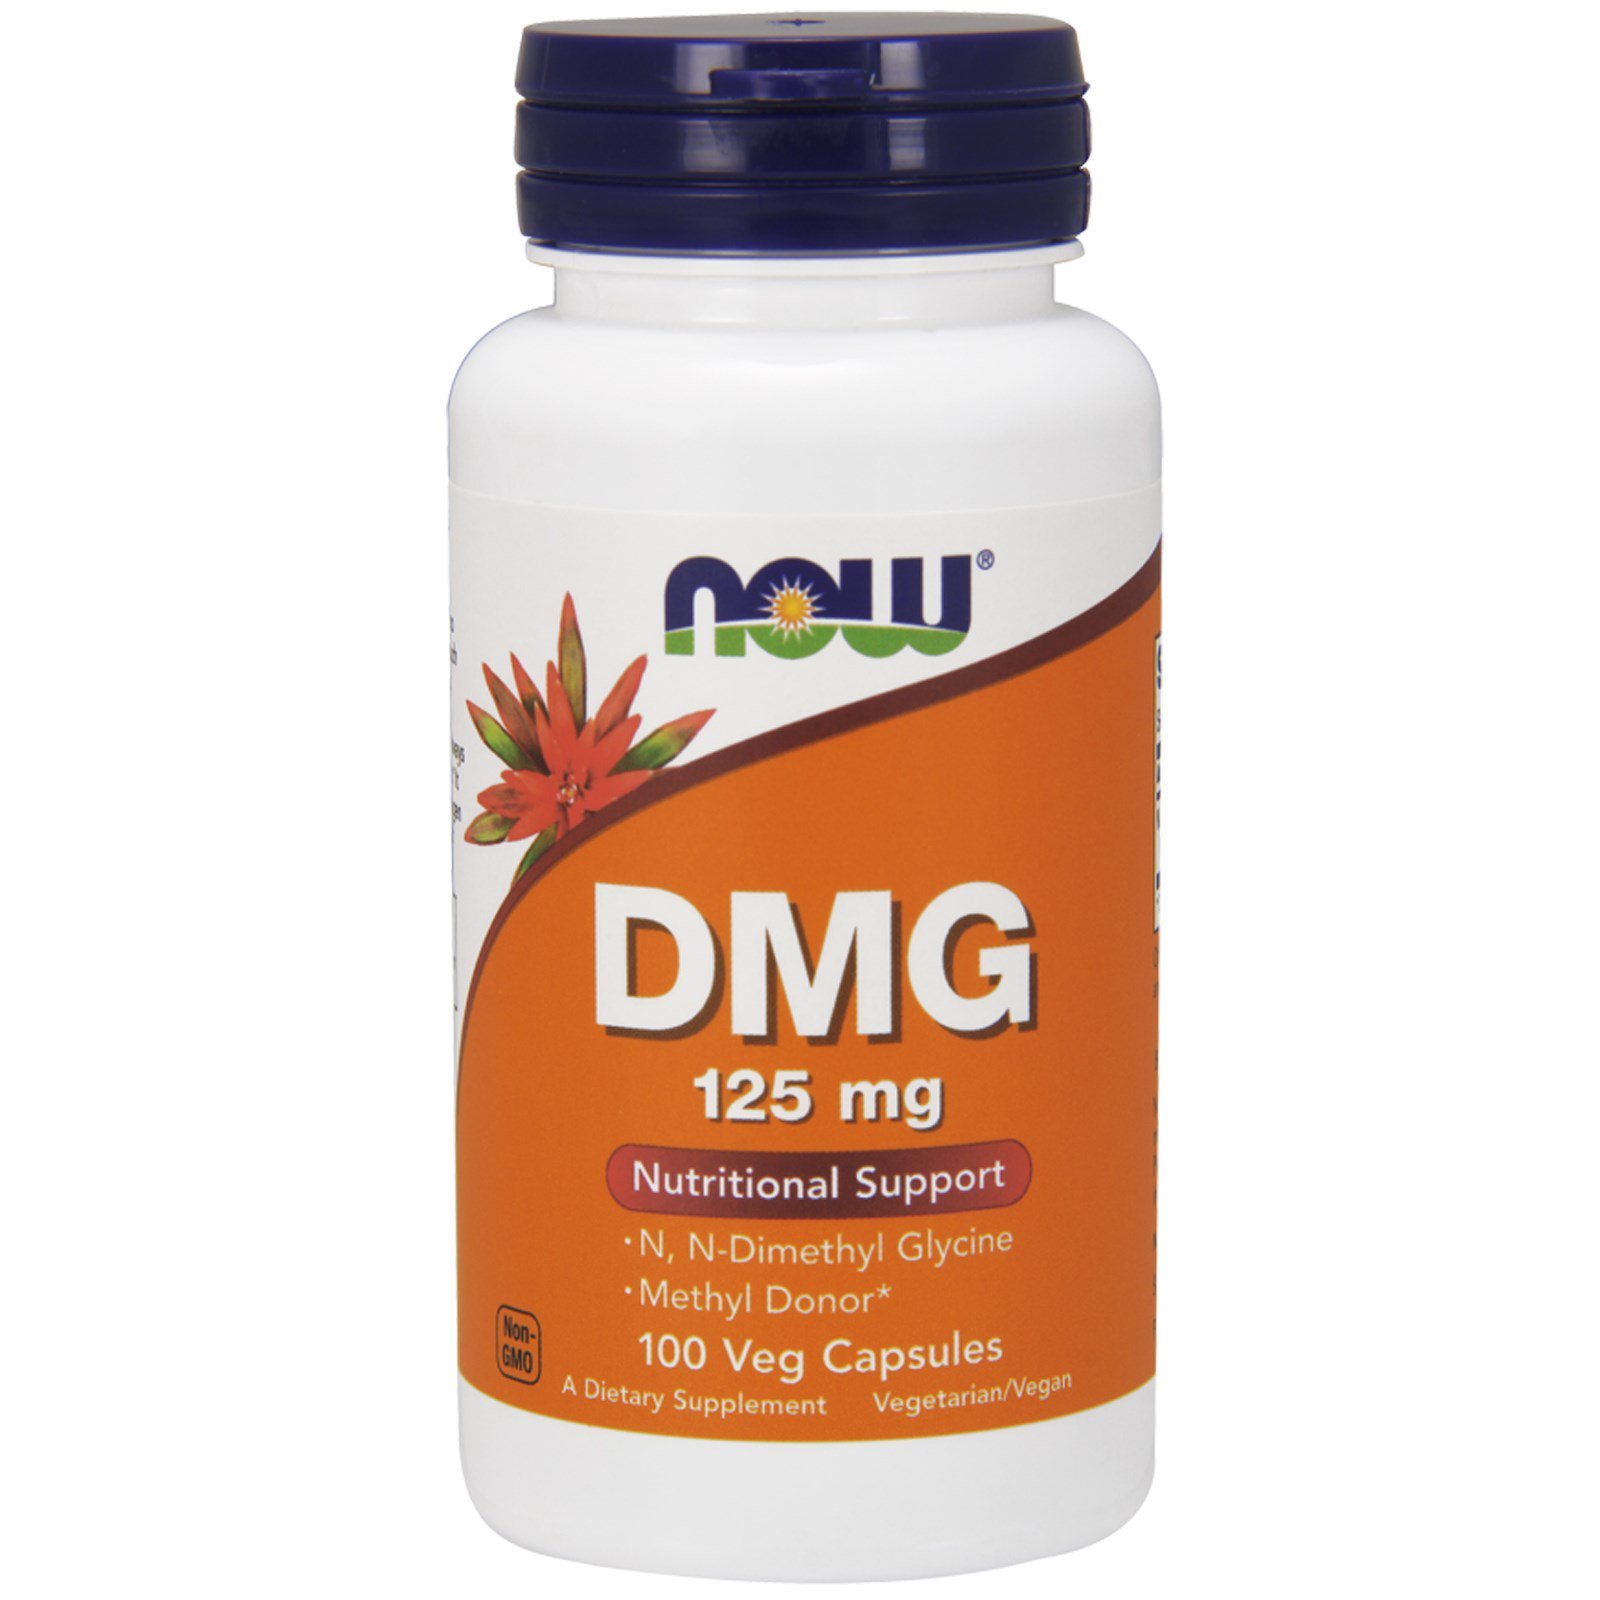 Benefits of dmg for energy reviews 2016